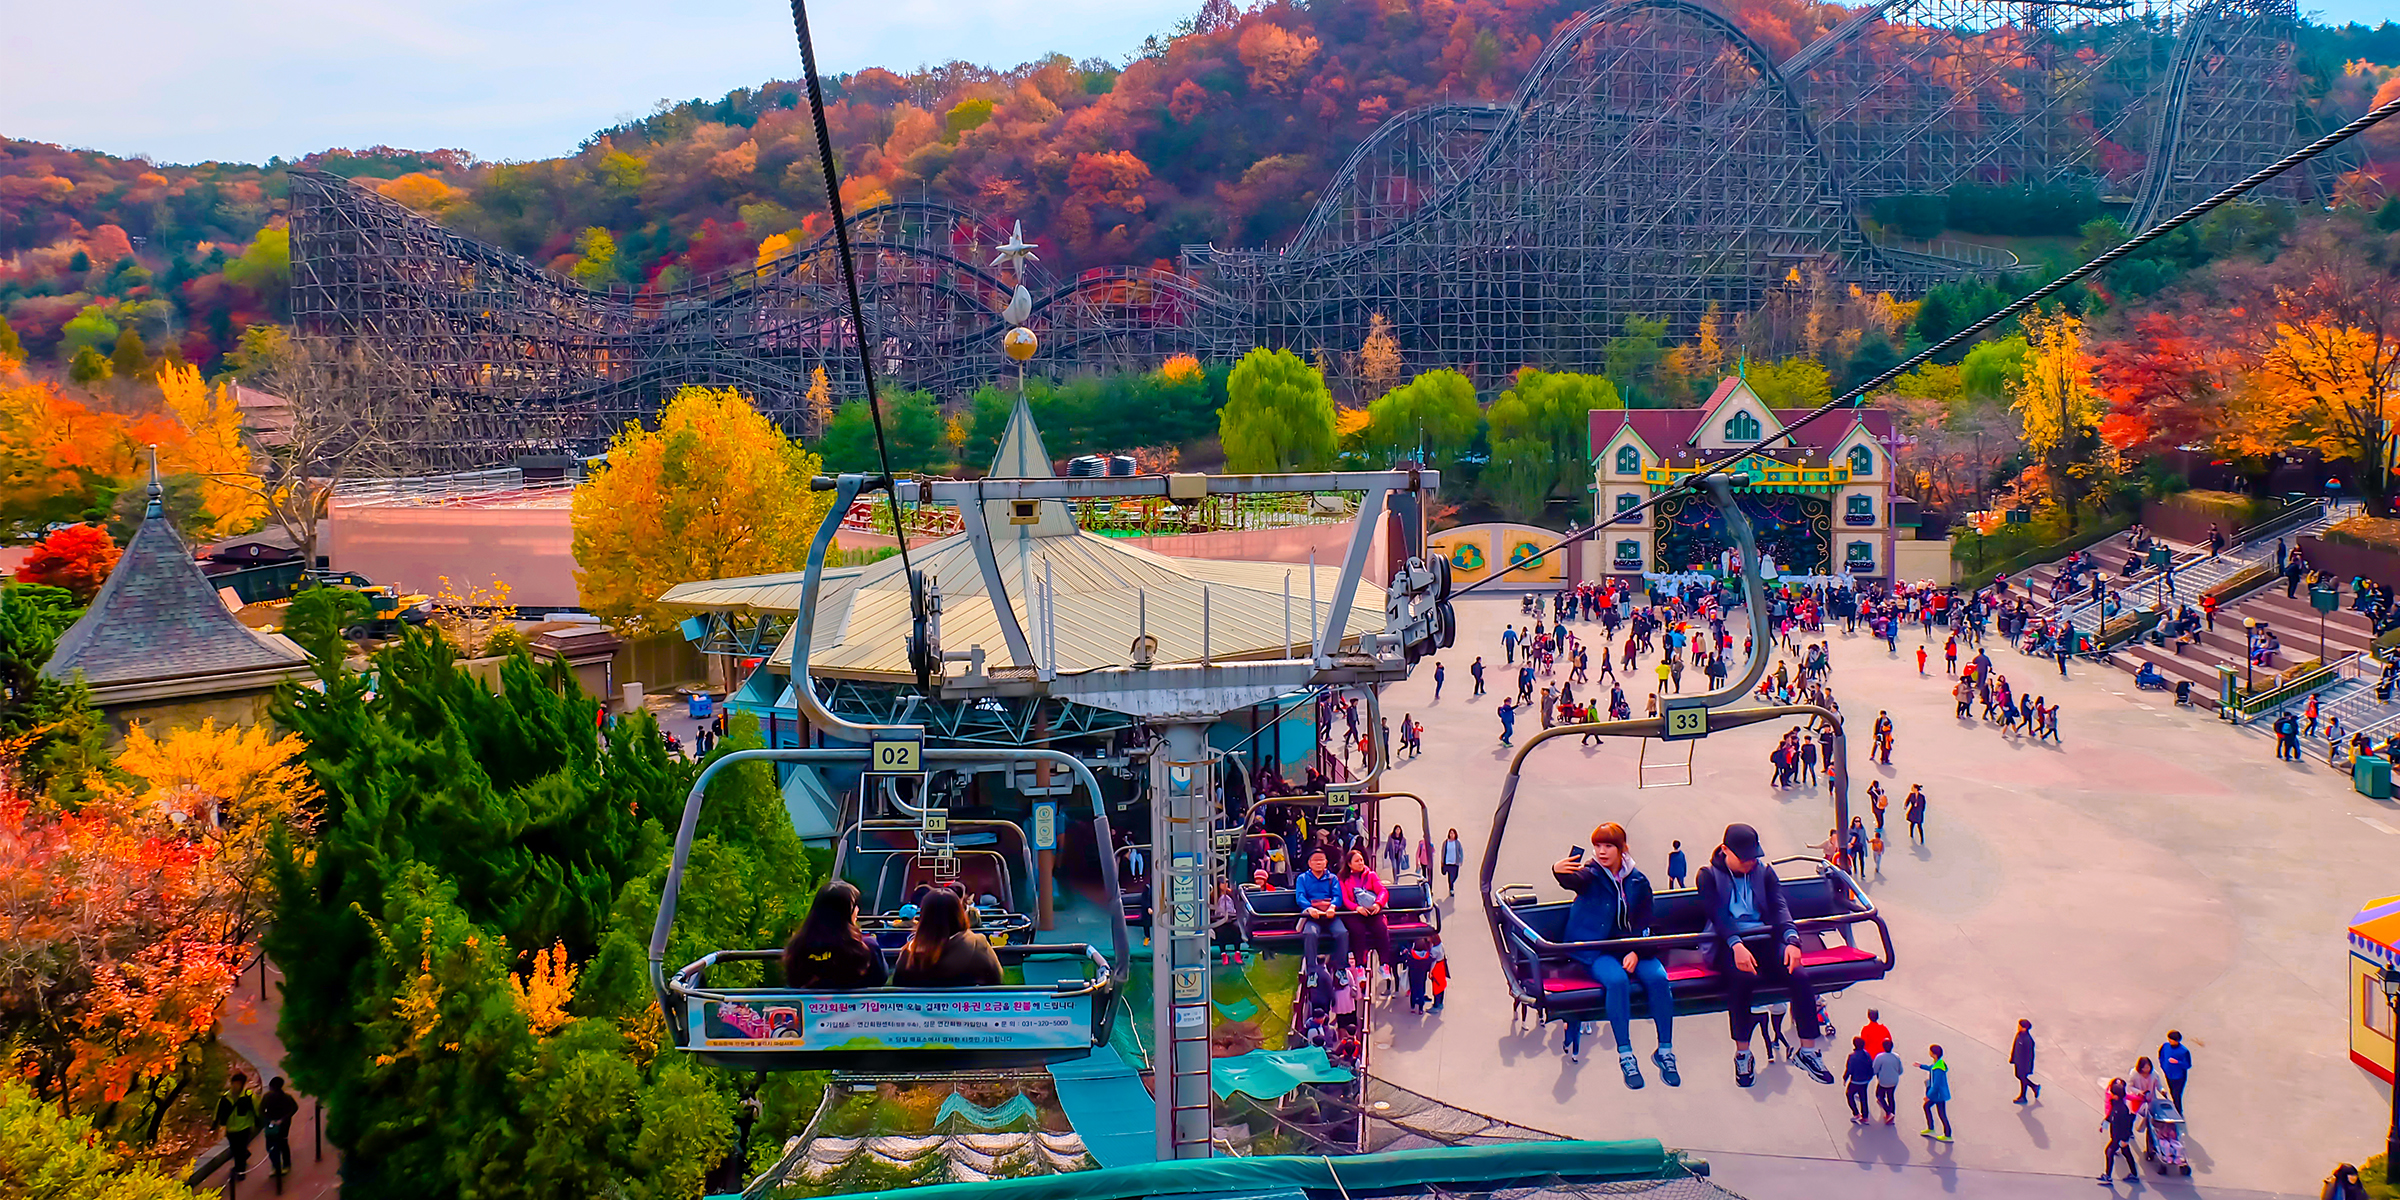 A section of the Everland amusement park in South Korea | Source: Shutterstock